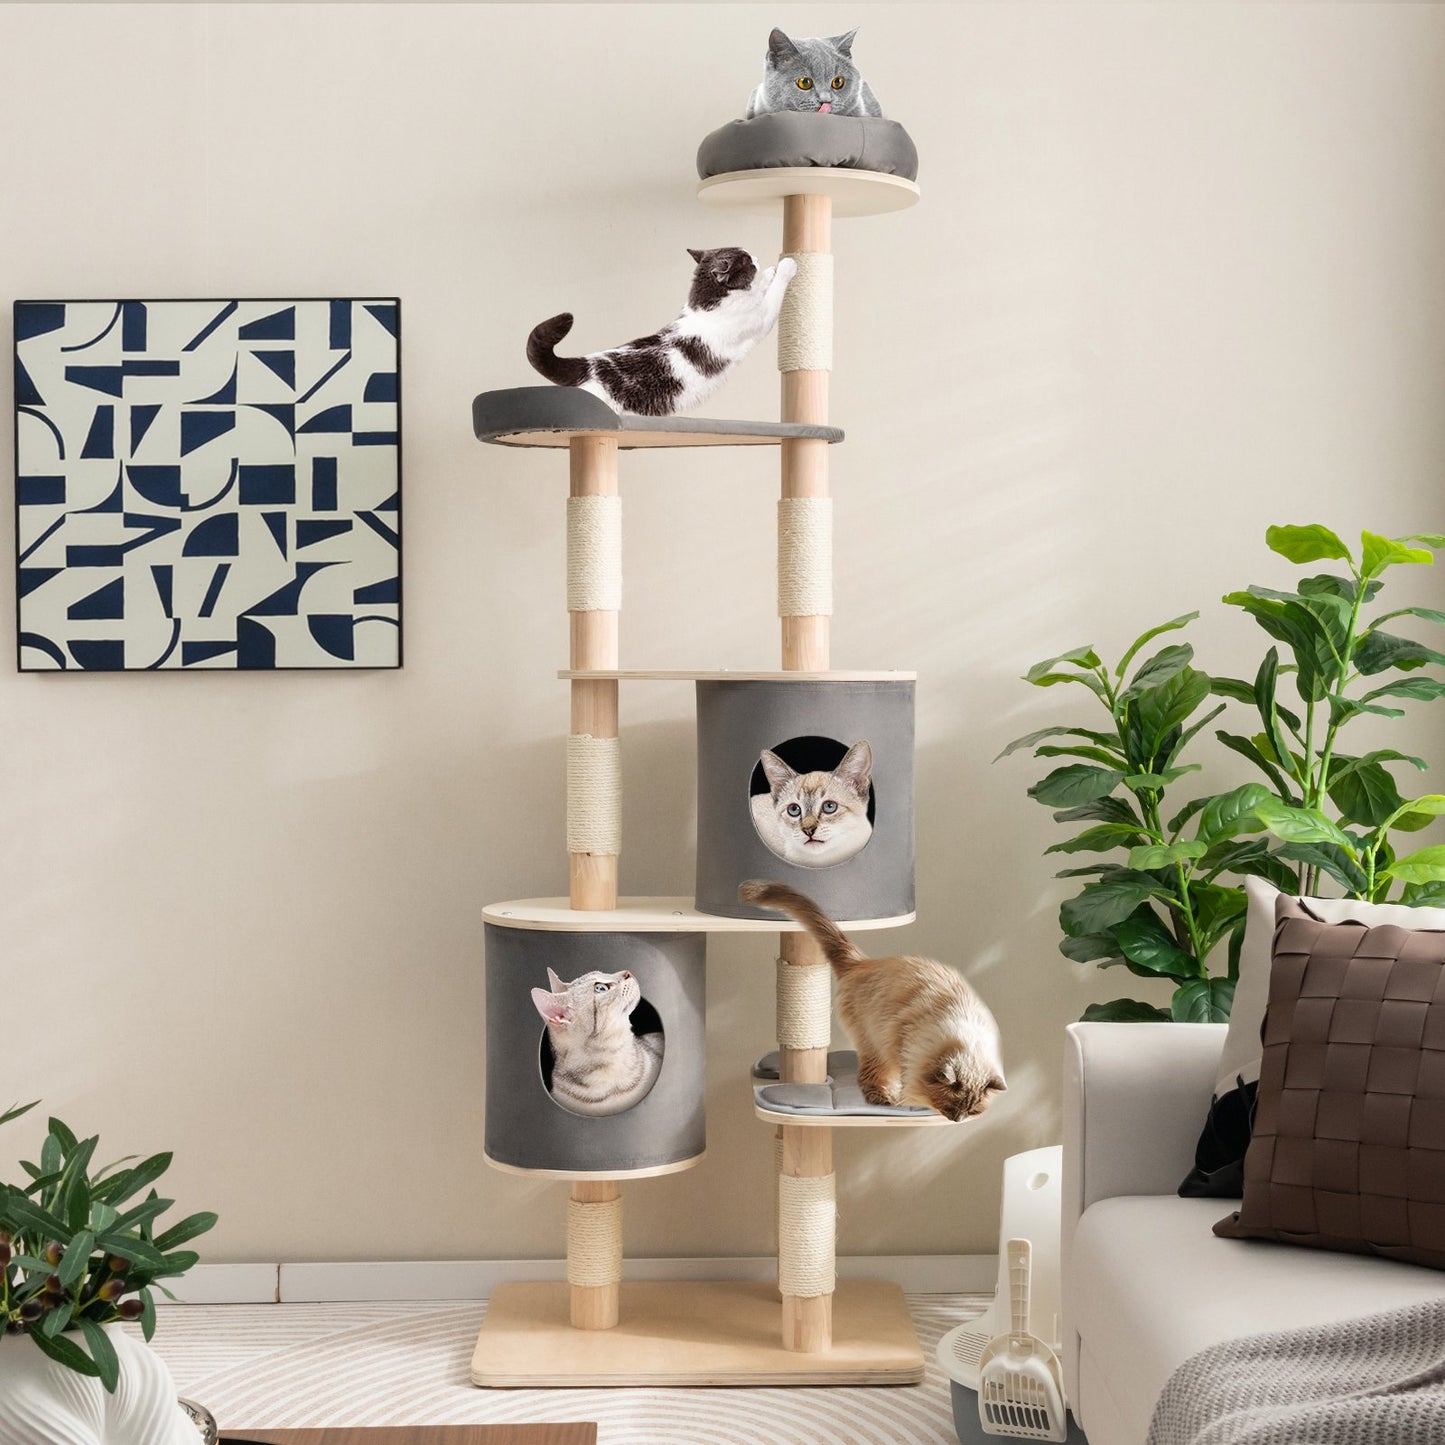 6-Tier Wooden Cat Tree with 2 Removeable Condos Platforms and Perch, Gray